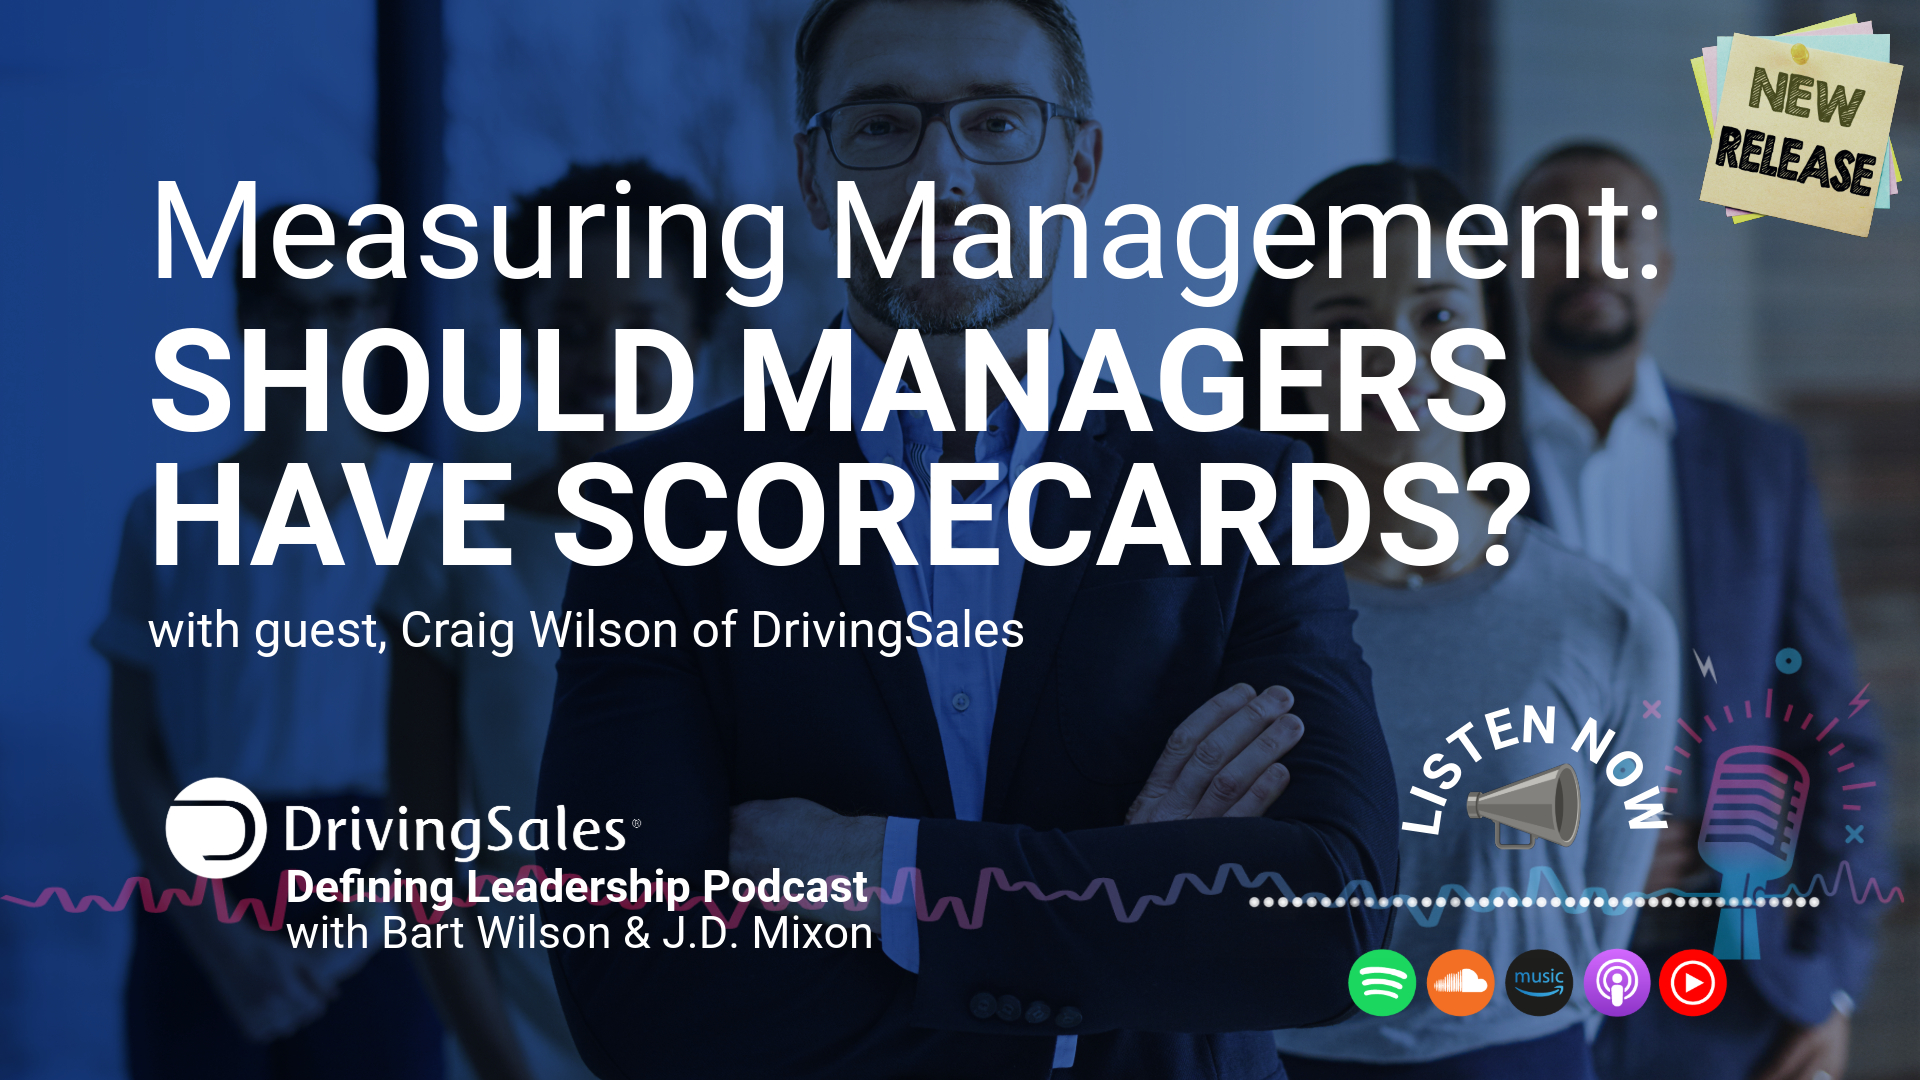 The image is a promotional graphic for a podcast episode titled "Measuring Management: SHOULD MANAGERS HAVE SCORECARDS?" It features a photograph of three individuals, likely representing business professionals or managers, in a corporate setting. The central figure, a middle-aged Caucasian man in a suit, is the focal point. The graphic includes the logo of DrivingSales' "Defining Leadership Podcast" and hosts Bart Wilson & J.D. Mixon, with guest Craig Wilson of DrivingSales. There are also icons for various streaming platforms like Spotify and Apple Music, encouraging viewers to listen to the episode. The design also features a "NEW RELEASE" tag to highlight the episode's recent availability.